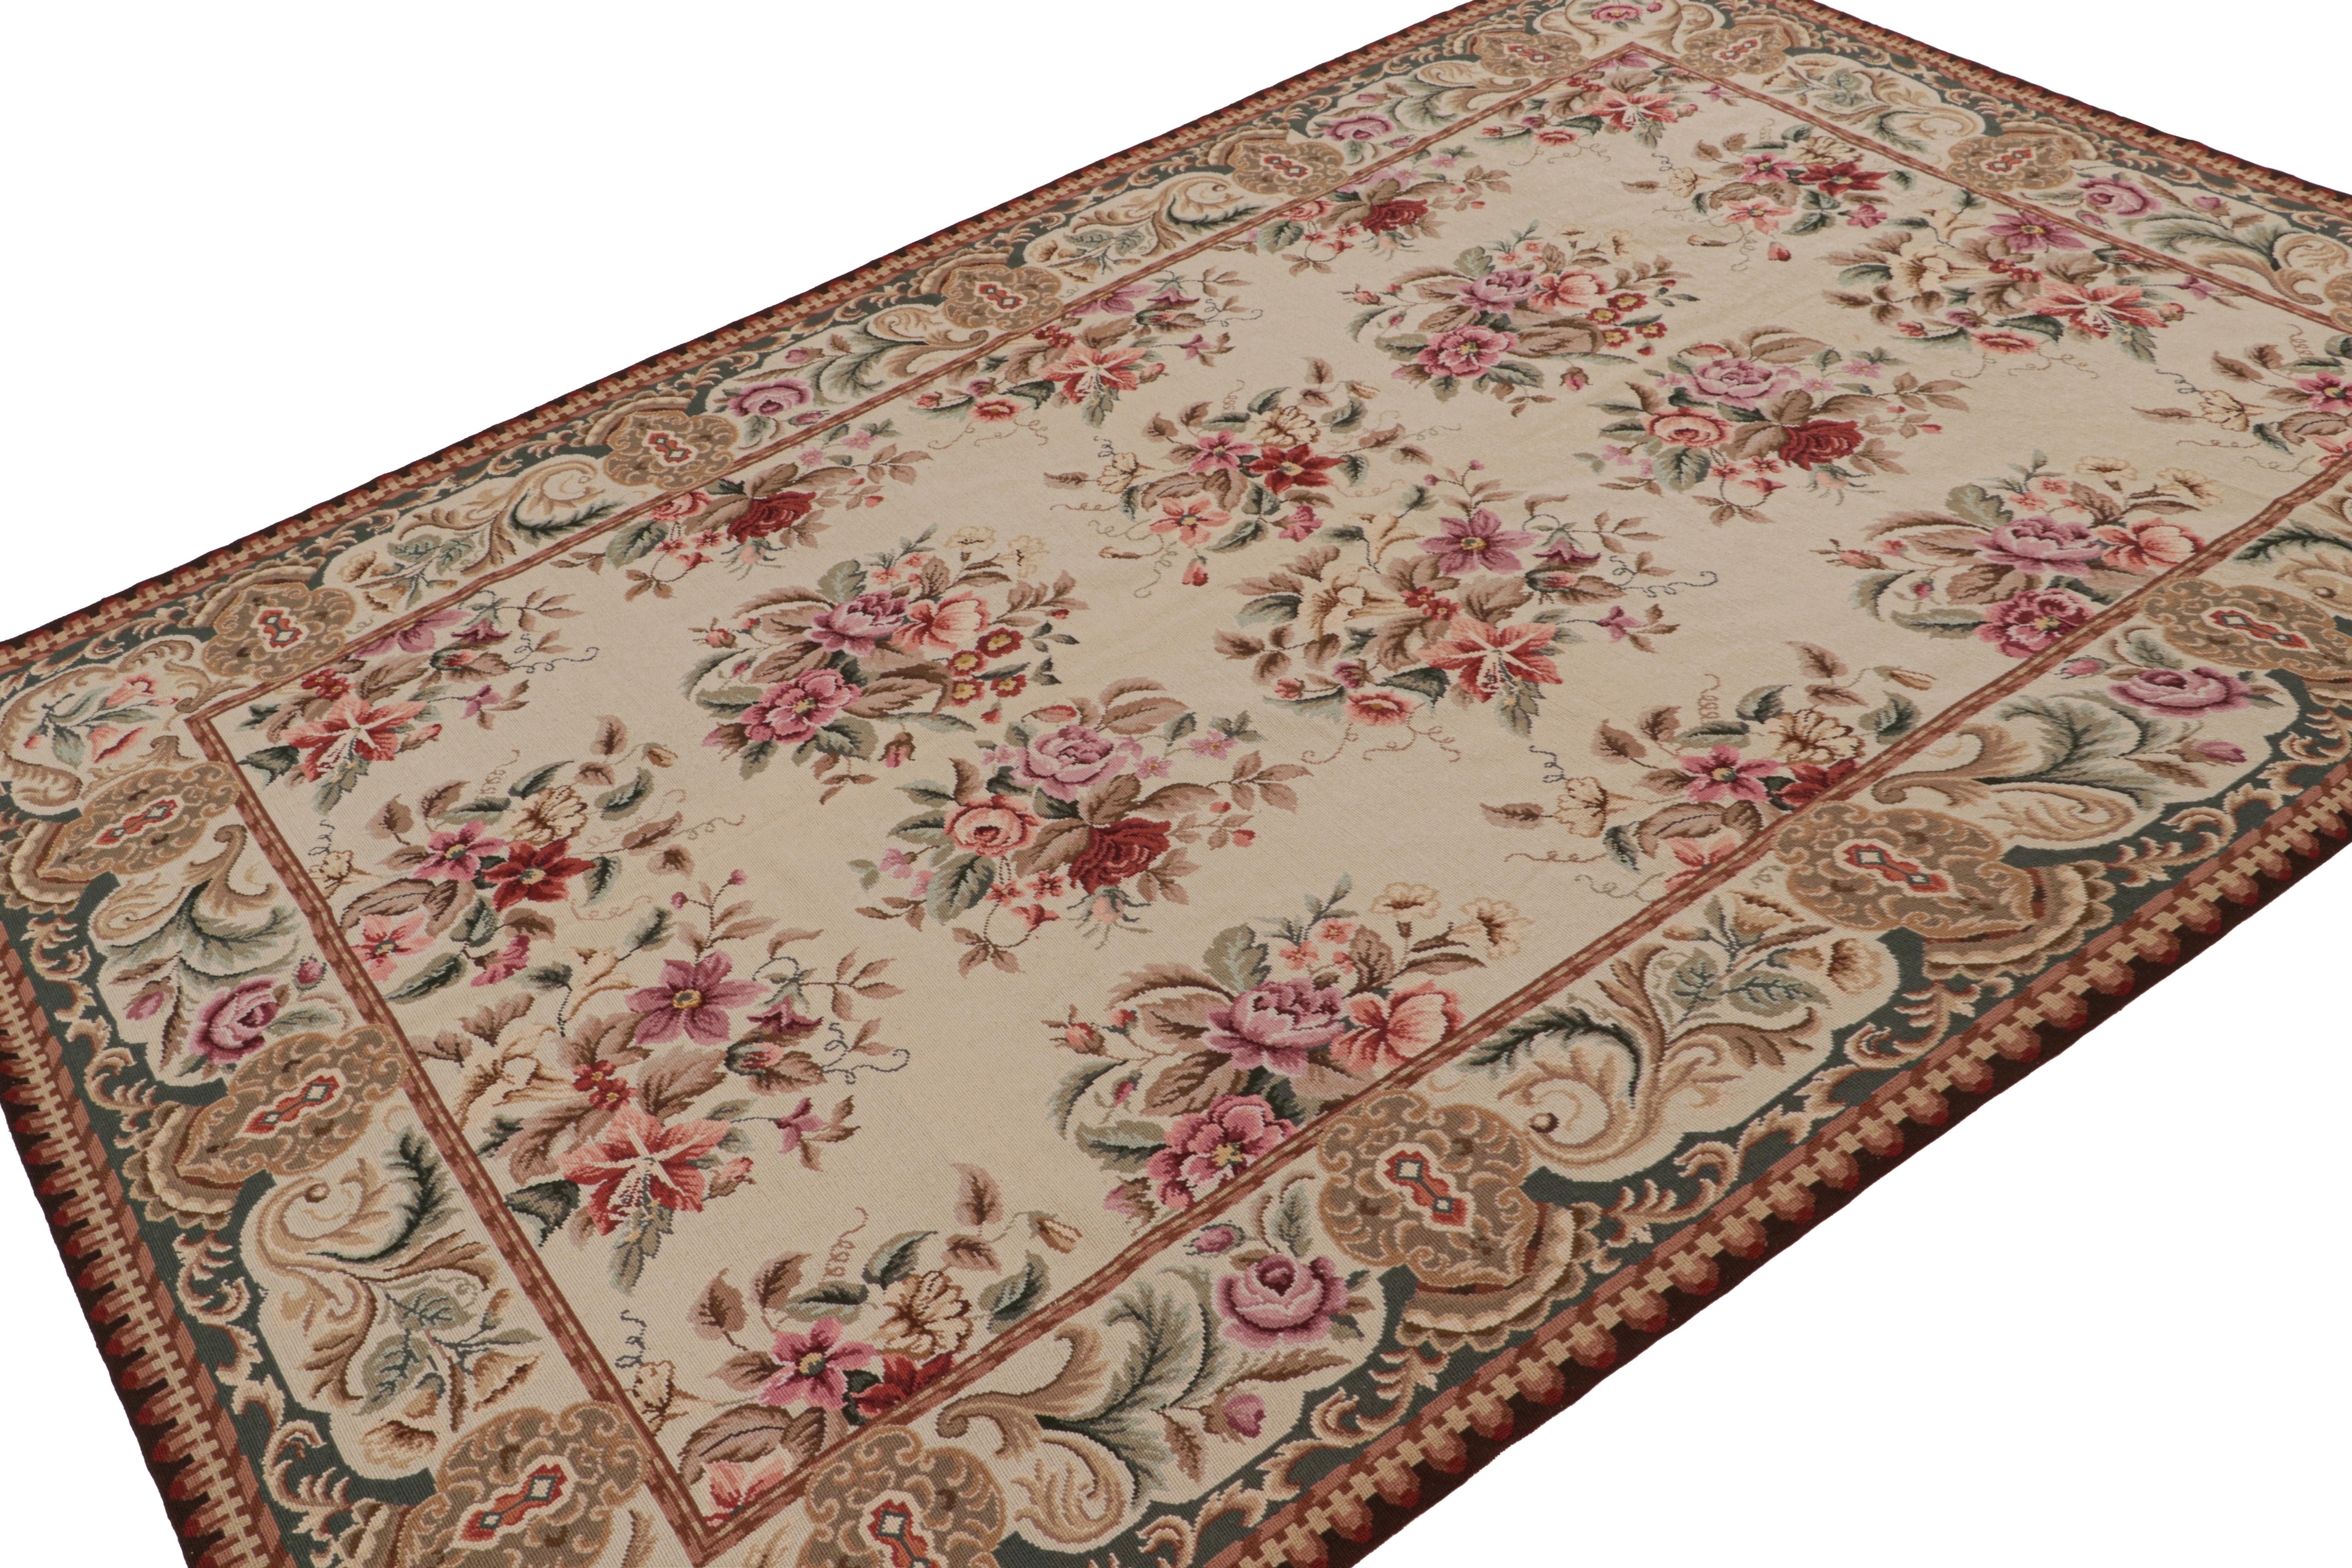 Hand-knotted in wool, this 6x9 European needlepoint rug originating from China, features floral designs that speak to Bessarabian and Aubusson sensibilities along with other transitional styles that favored this rich feminine look.  

On the Design: